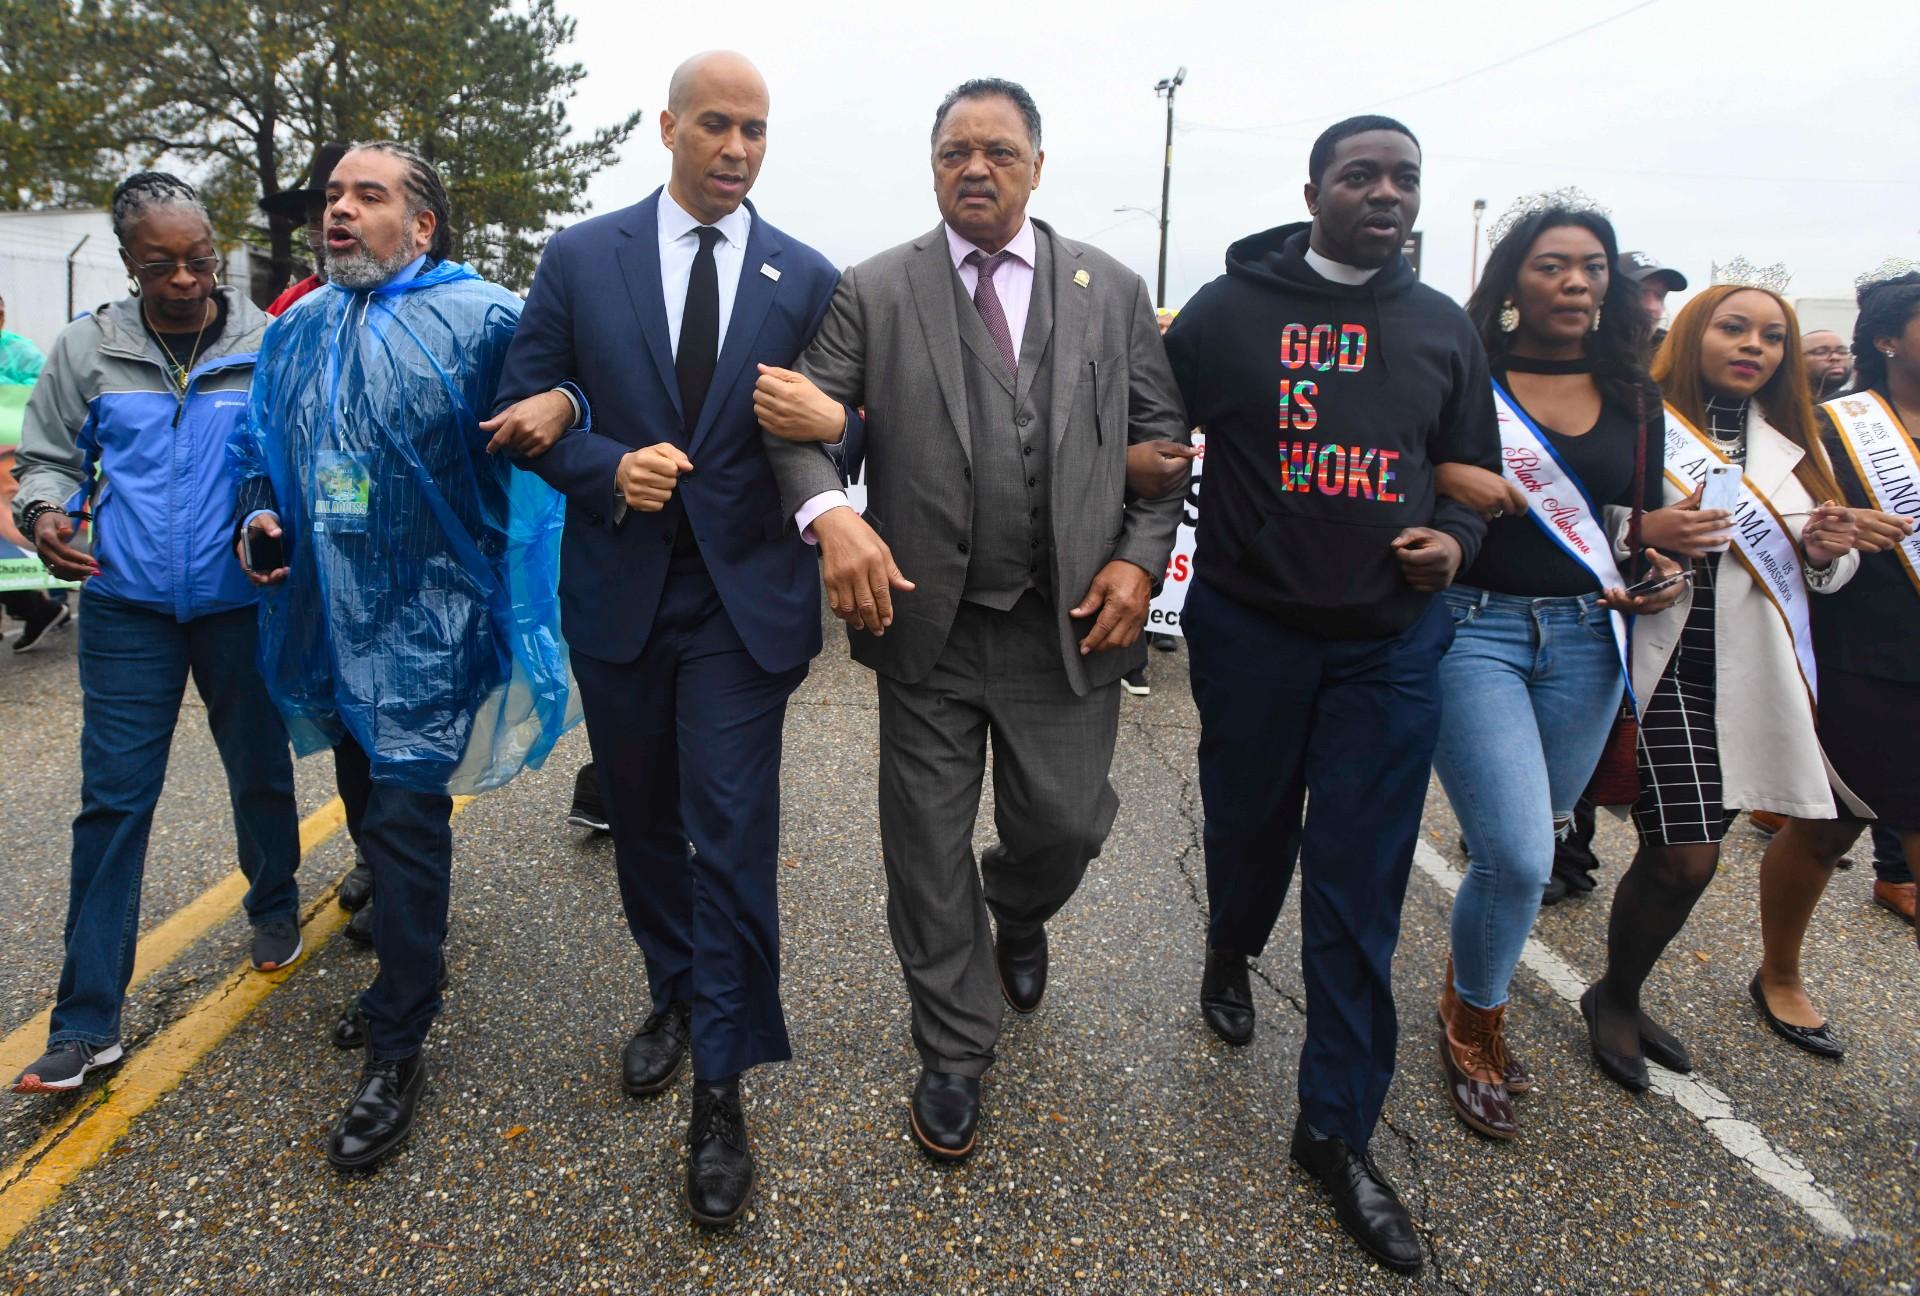 U.S. Sen. Cory Booker, D-N.J., third from left, and the Rev. Jesse Jackson march to cross the Edmund Pettus Bridge Sunday, March 3, 2019, during the Bloody Sunday commemoration in Selma, Ala. The infamous “Bloody Sunday” on March 7, 1965, galvanized support for the passage of the Voting Rights Act that year. (AP Photo / Julie Bennett)